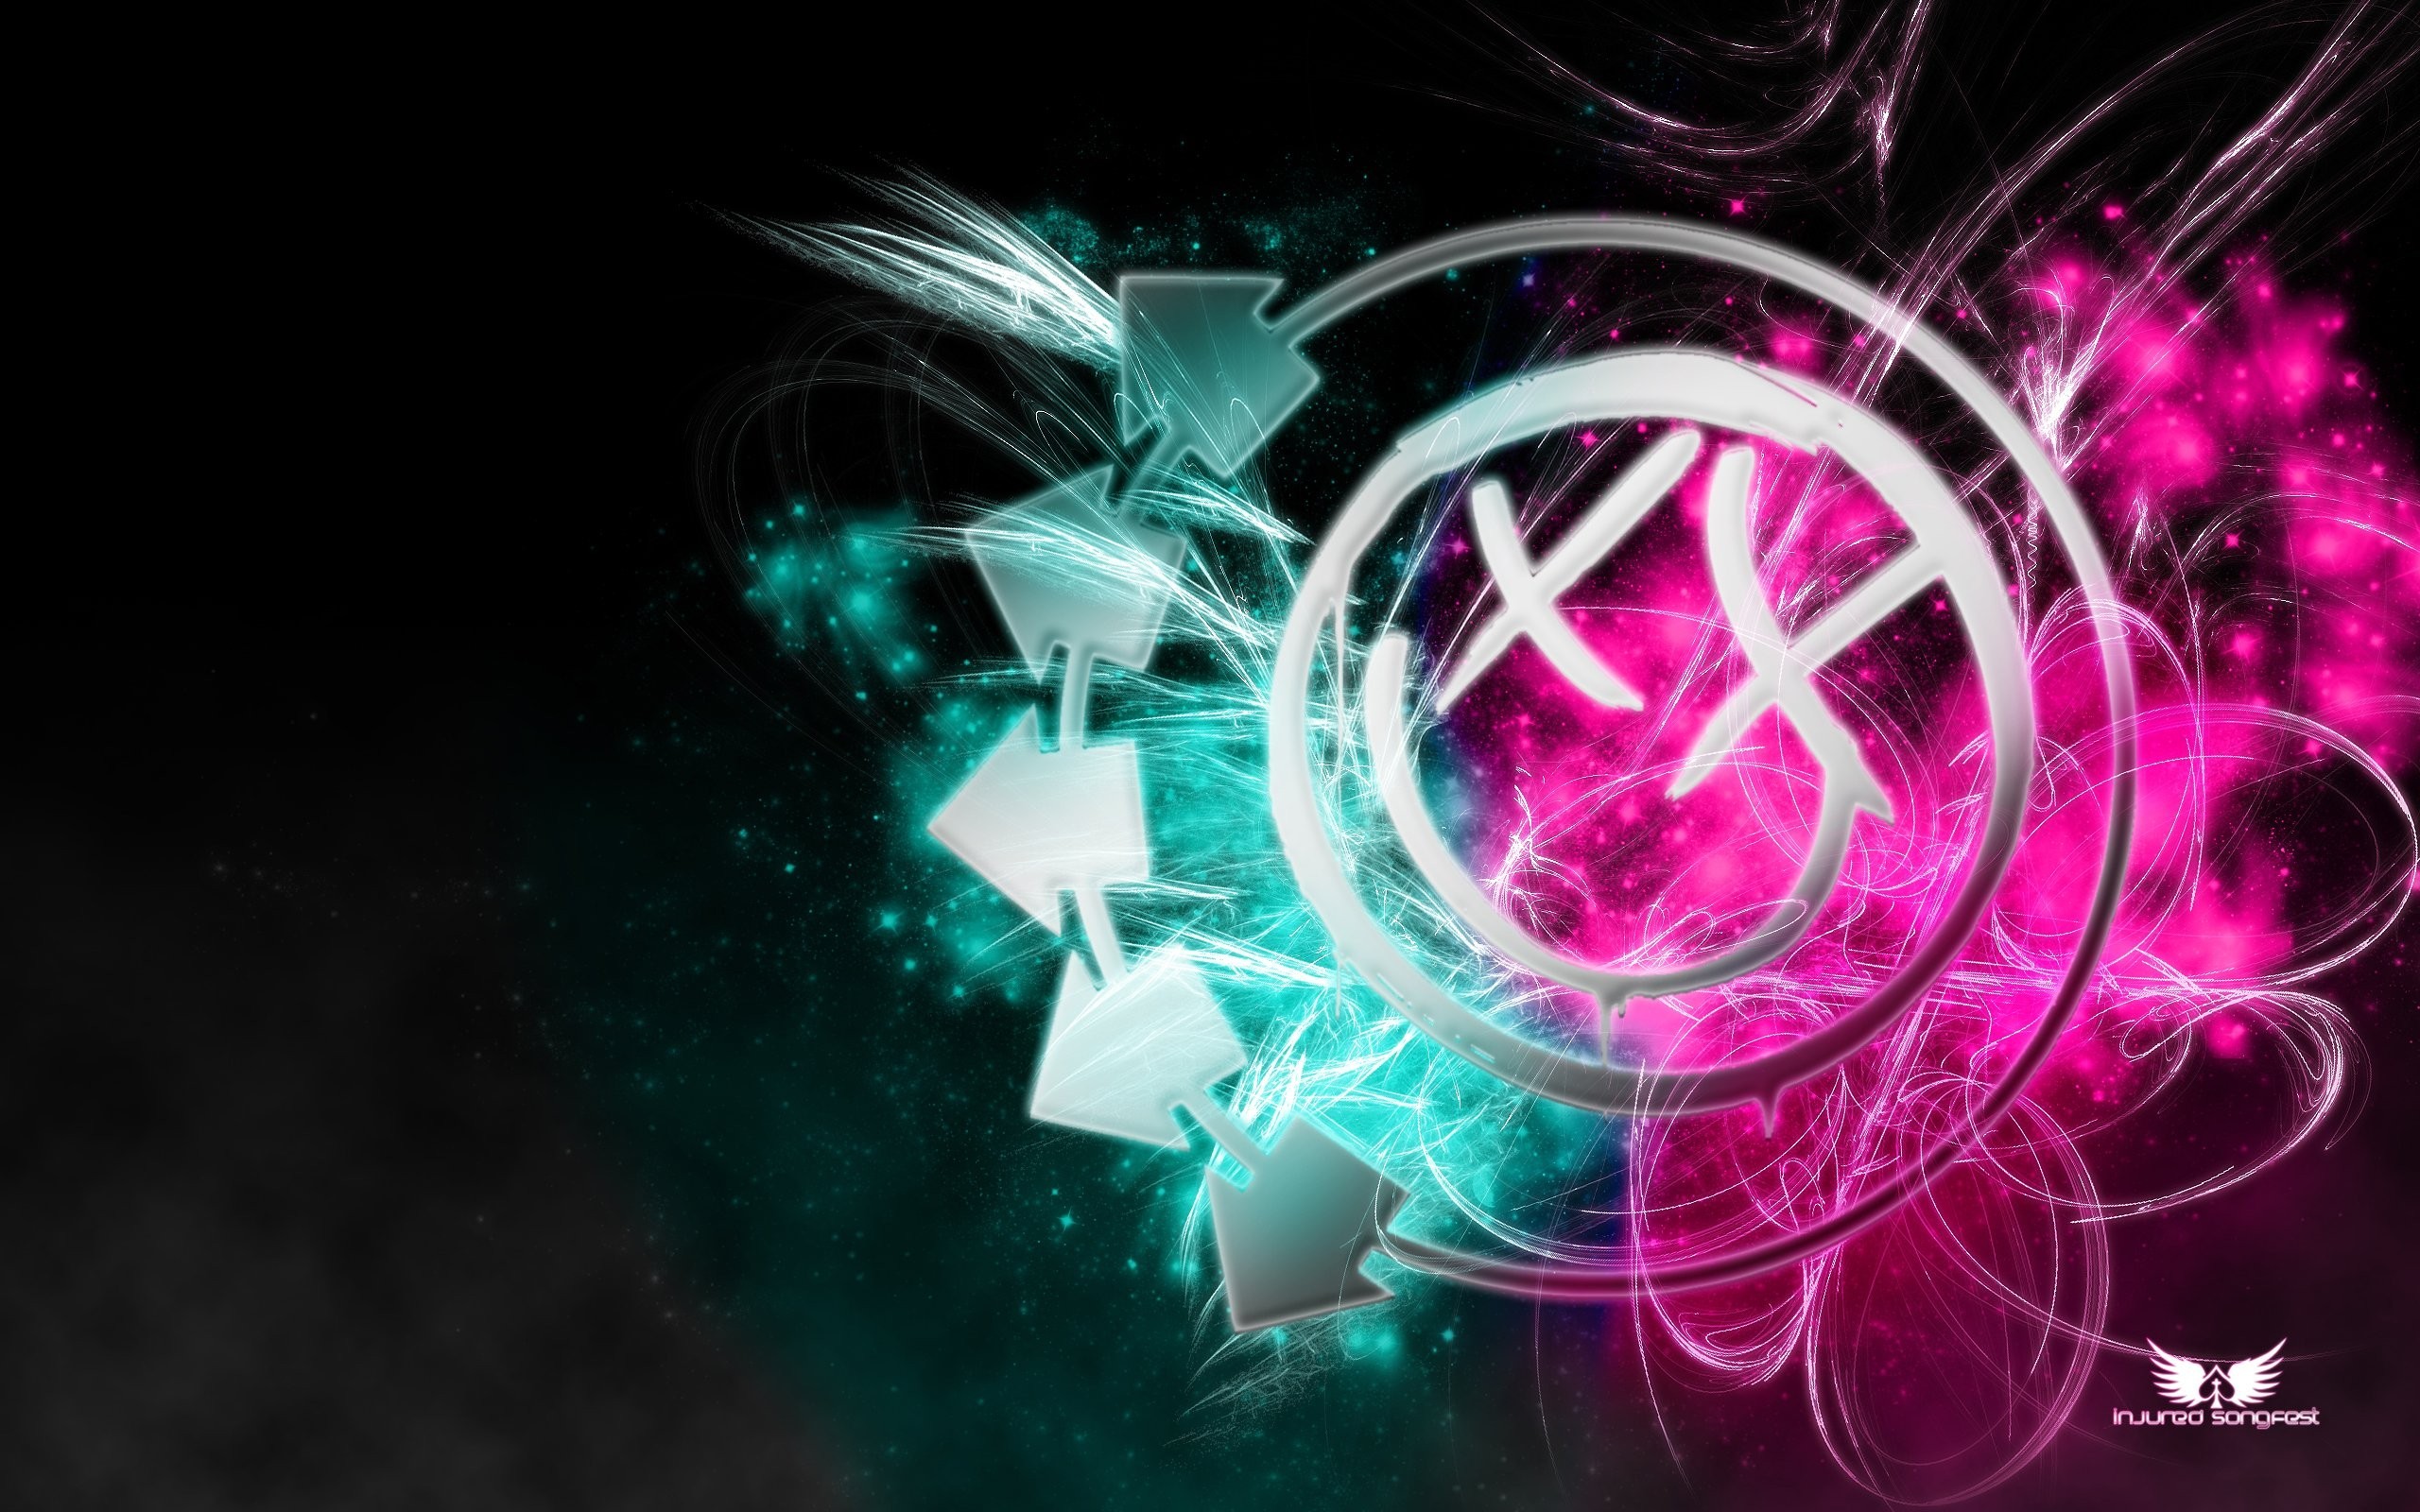 2560x1600  Blink 182 Wallpaper 833535. TAGS: Blink Awesome Smiley Anime